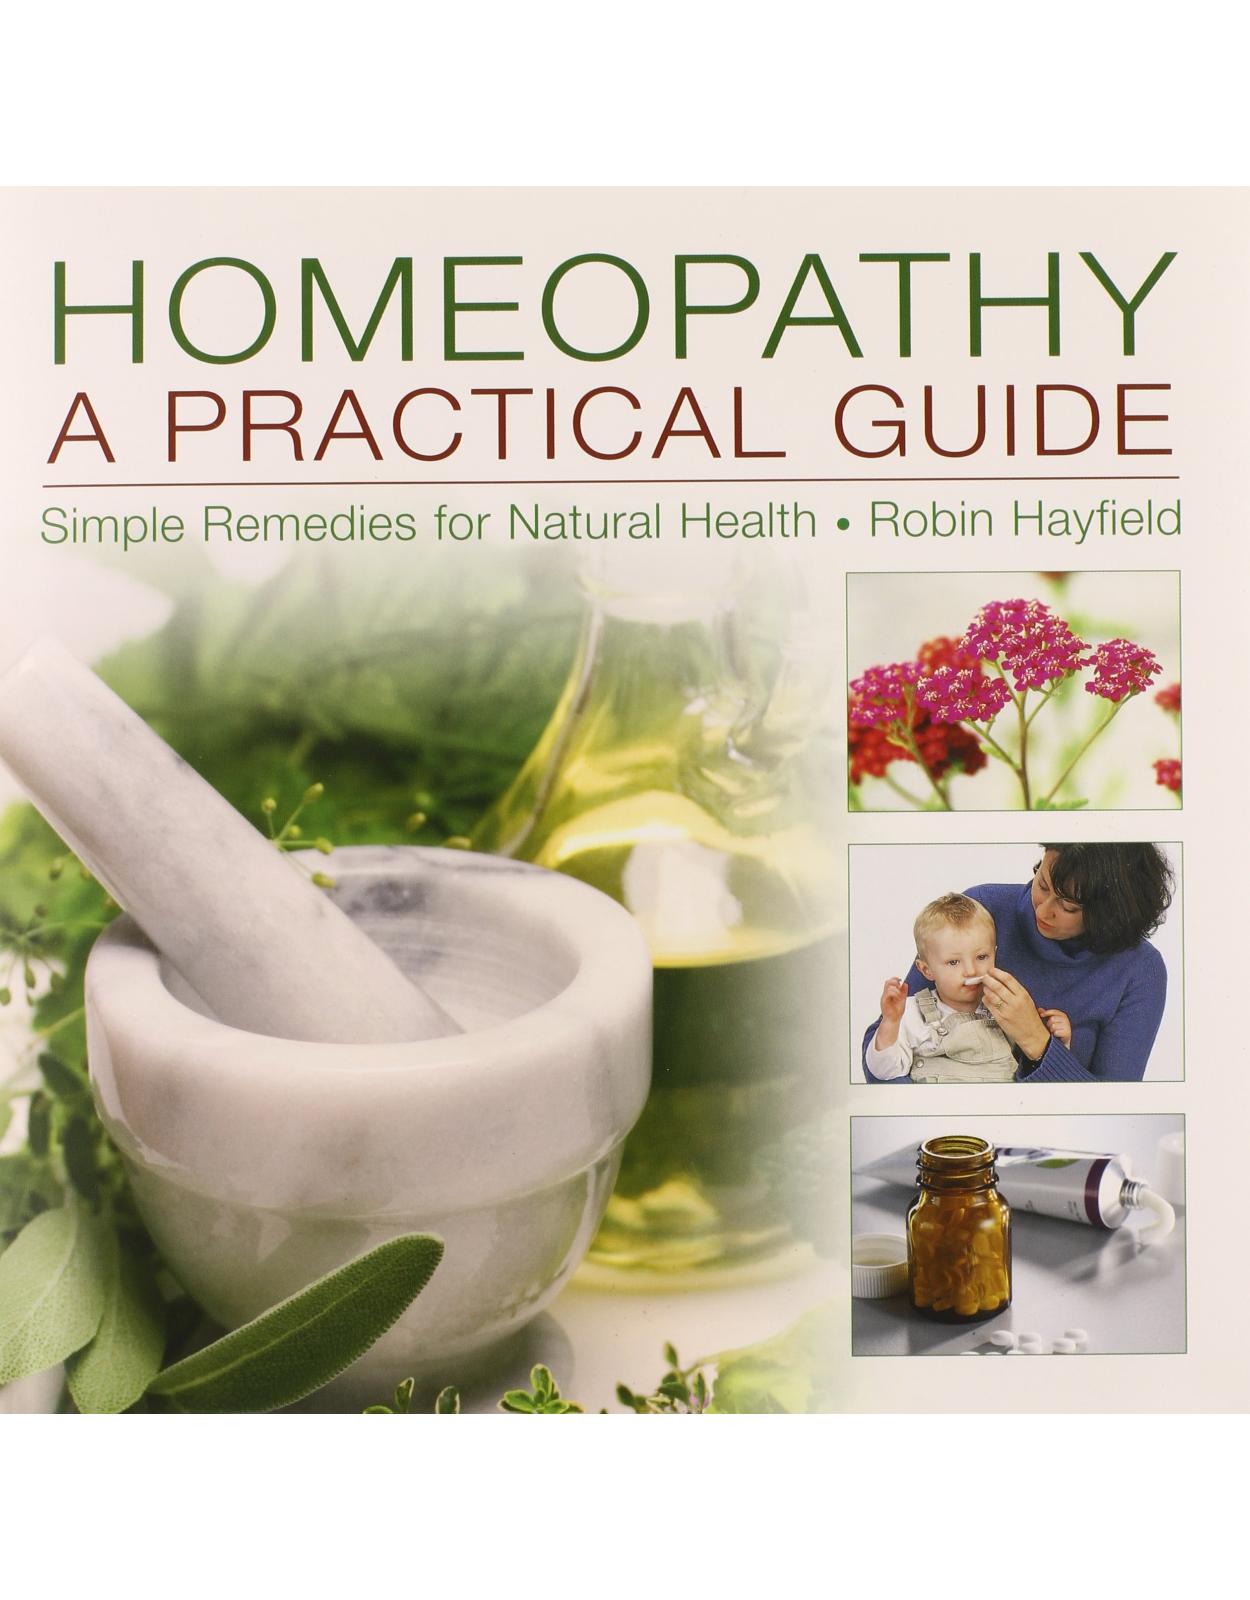 Homeopathy: A Practical Guide: Simple Remedies for Natural Health